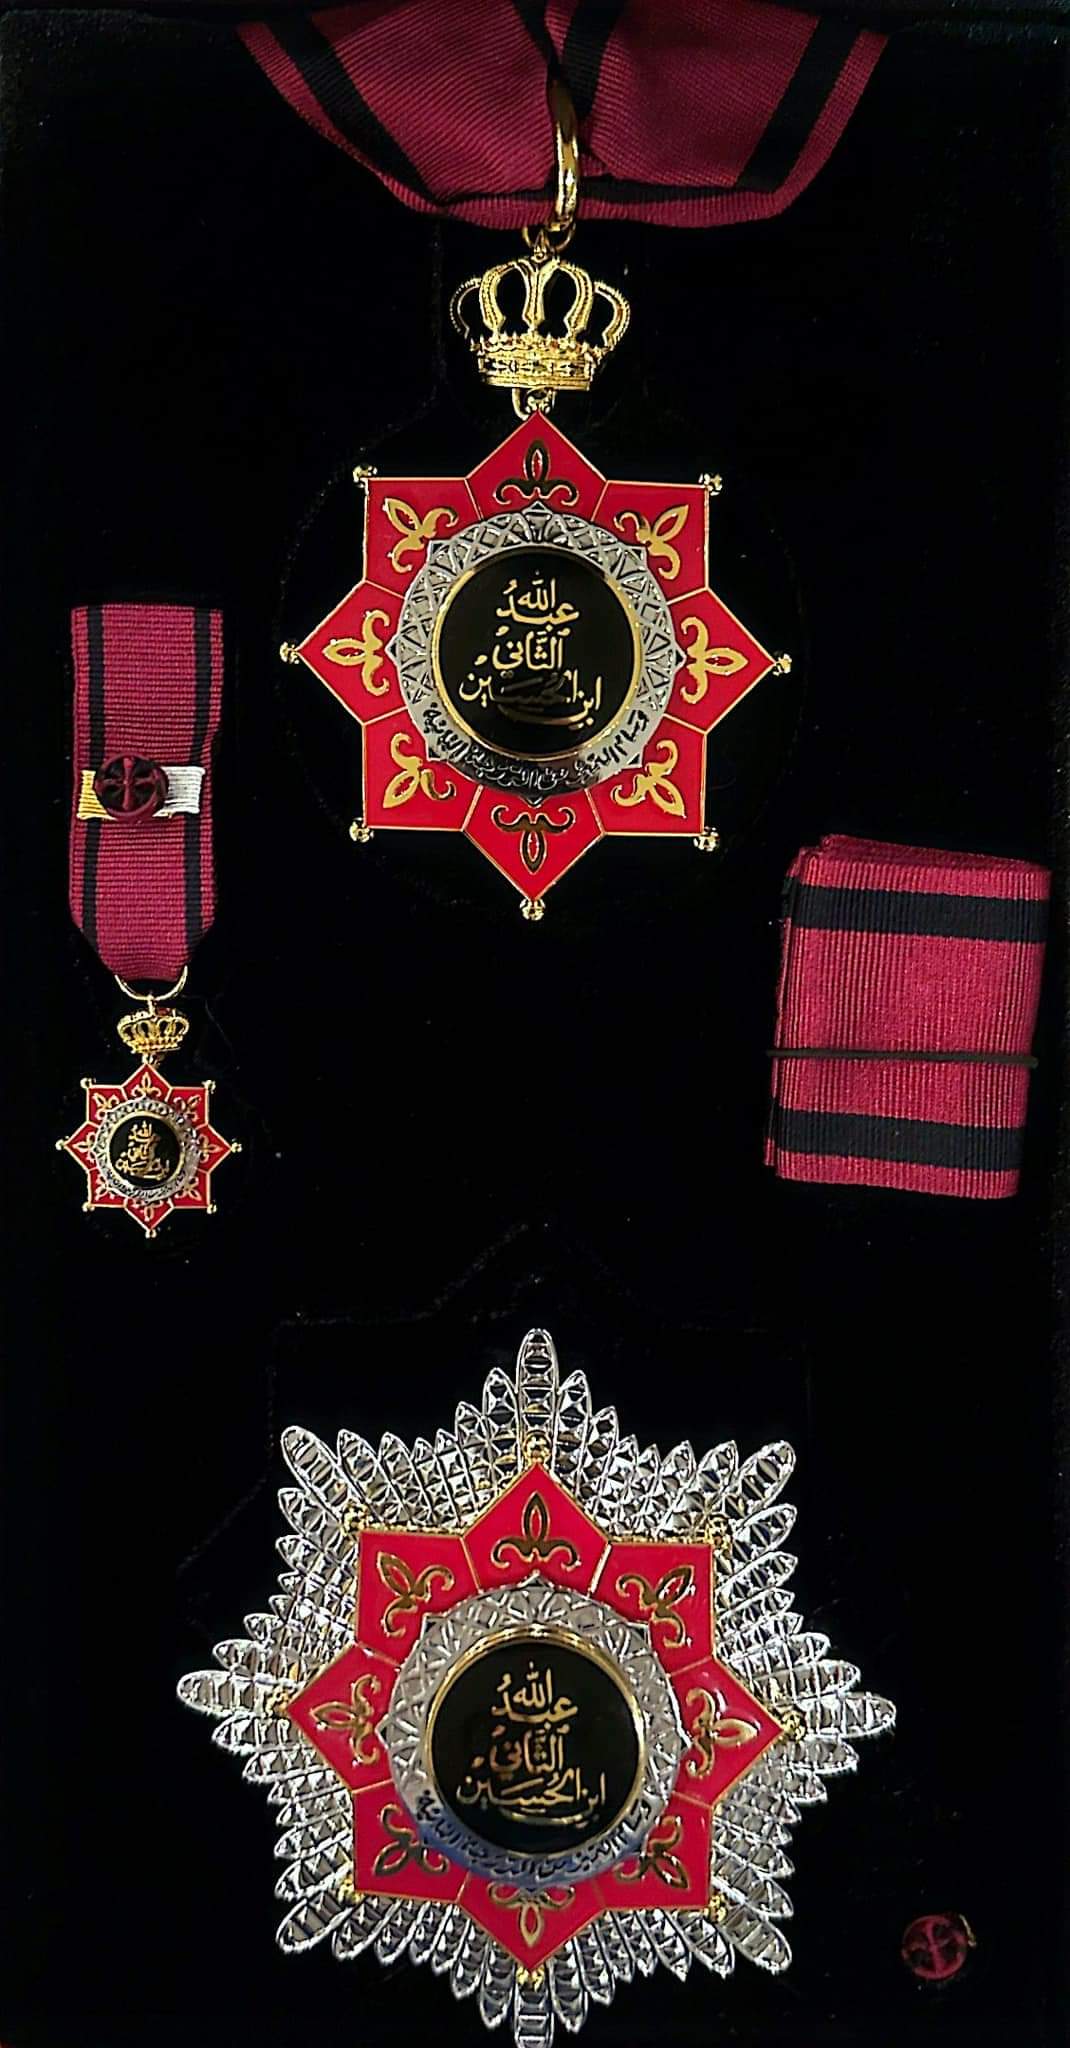 A composite image of different close ups of the medal. The medal consists of a black circular centre with arabic writing in gold, surrounded by a red eight-pointed ornate star embosed with gold. The medal is attached to a red and black woven ribbon by a gold crown.